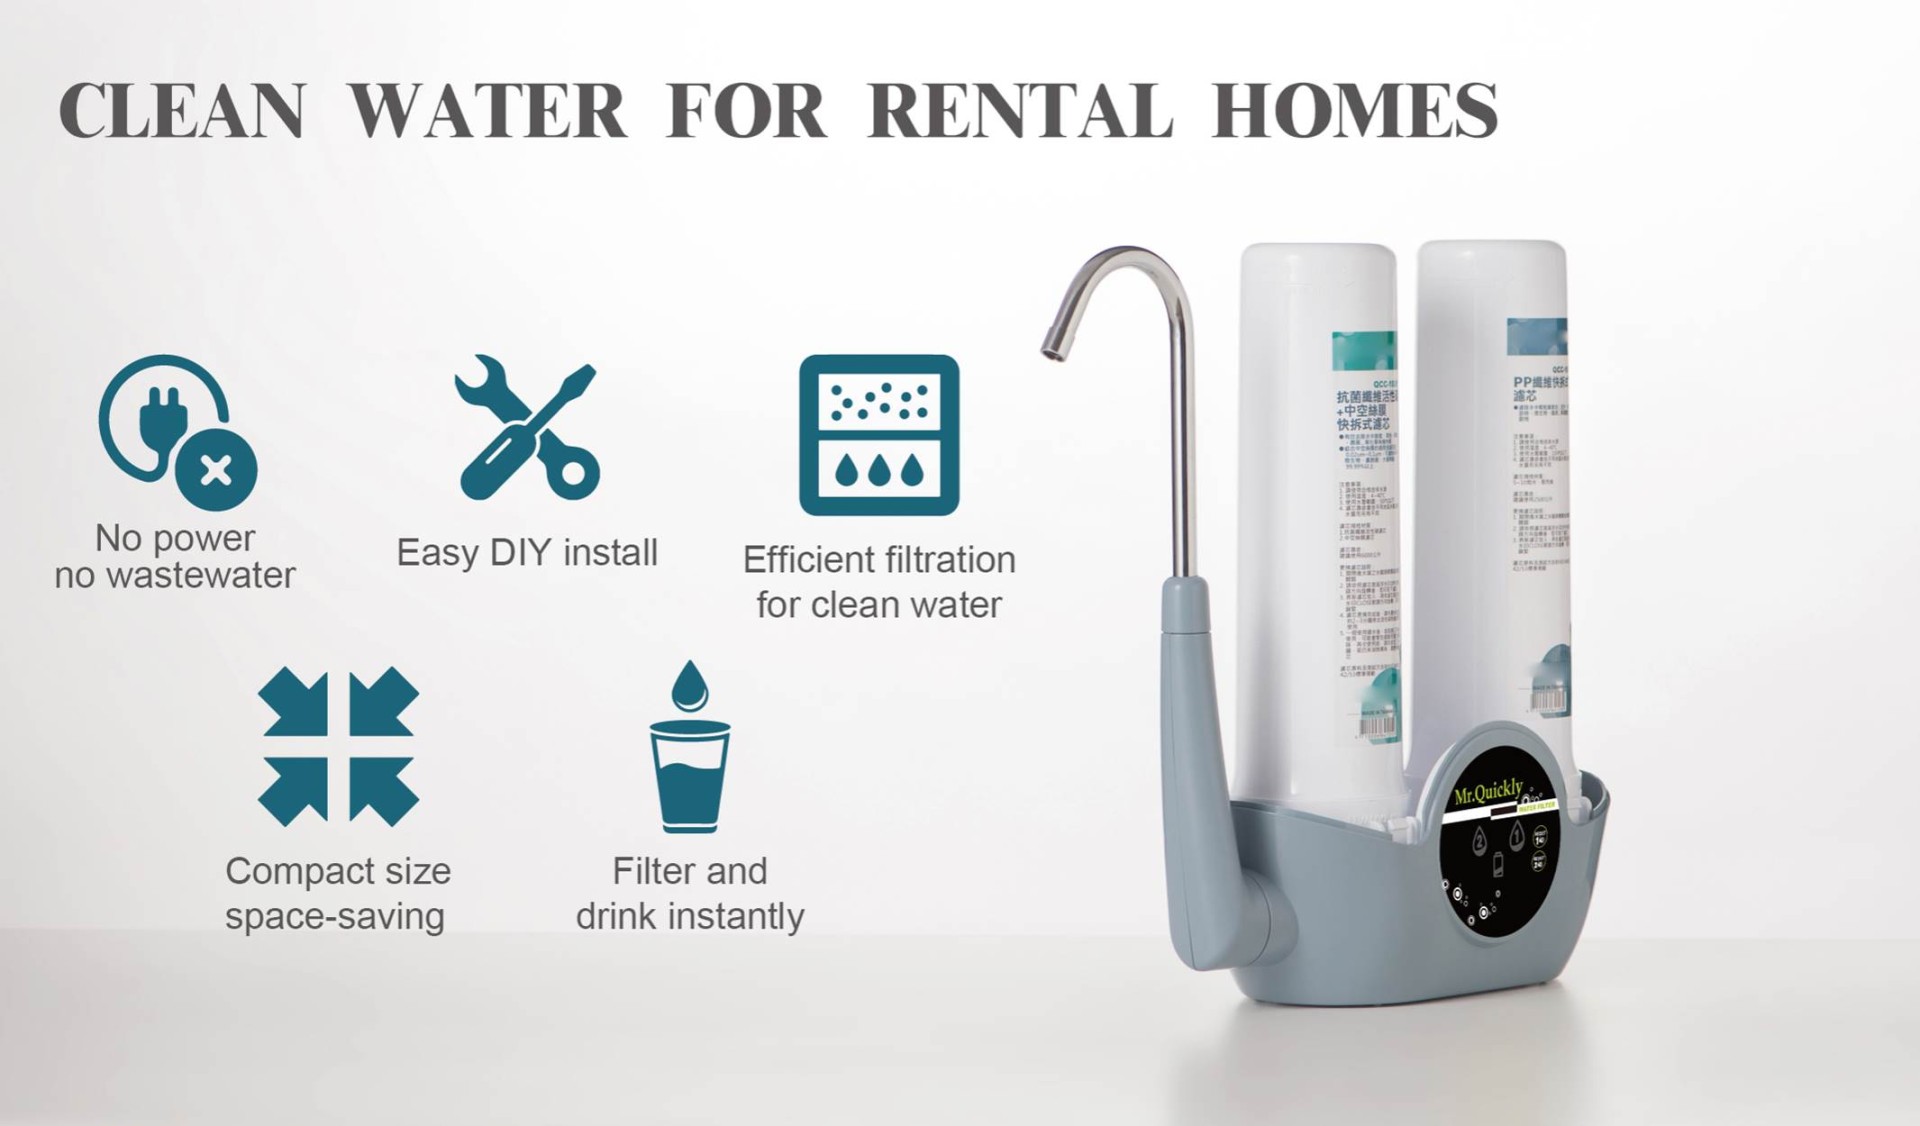 Clean water for rental homes